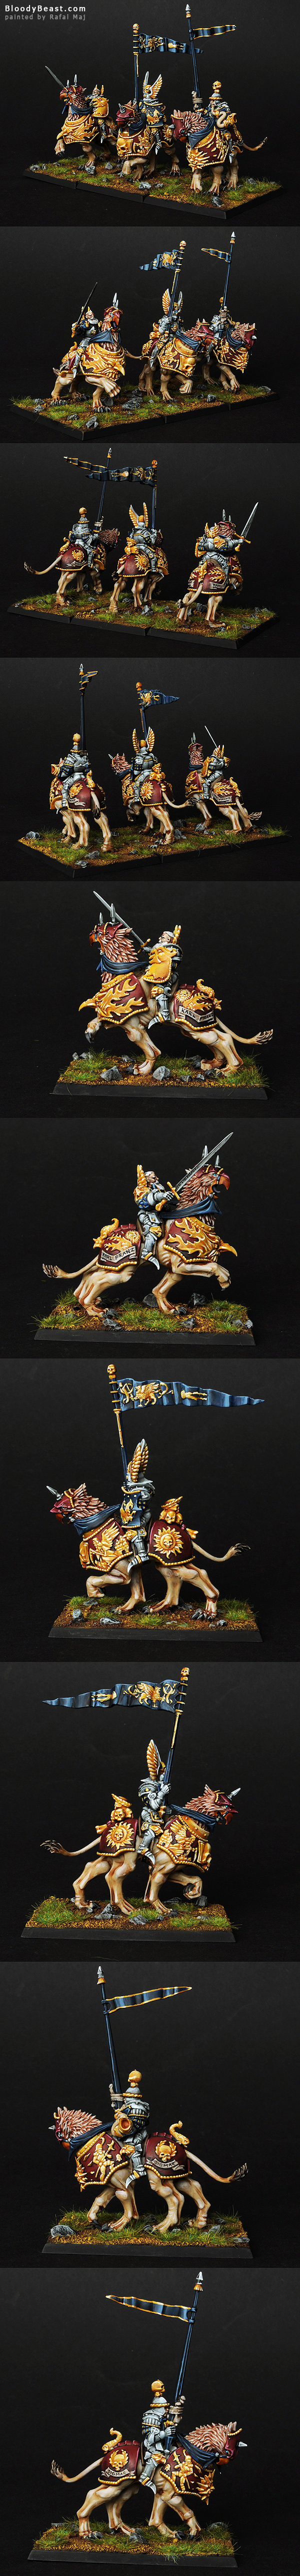 Empire Demigryph Knights painted by Rafal Maj (BloodyBeast.com)